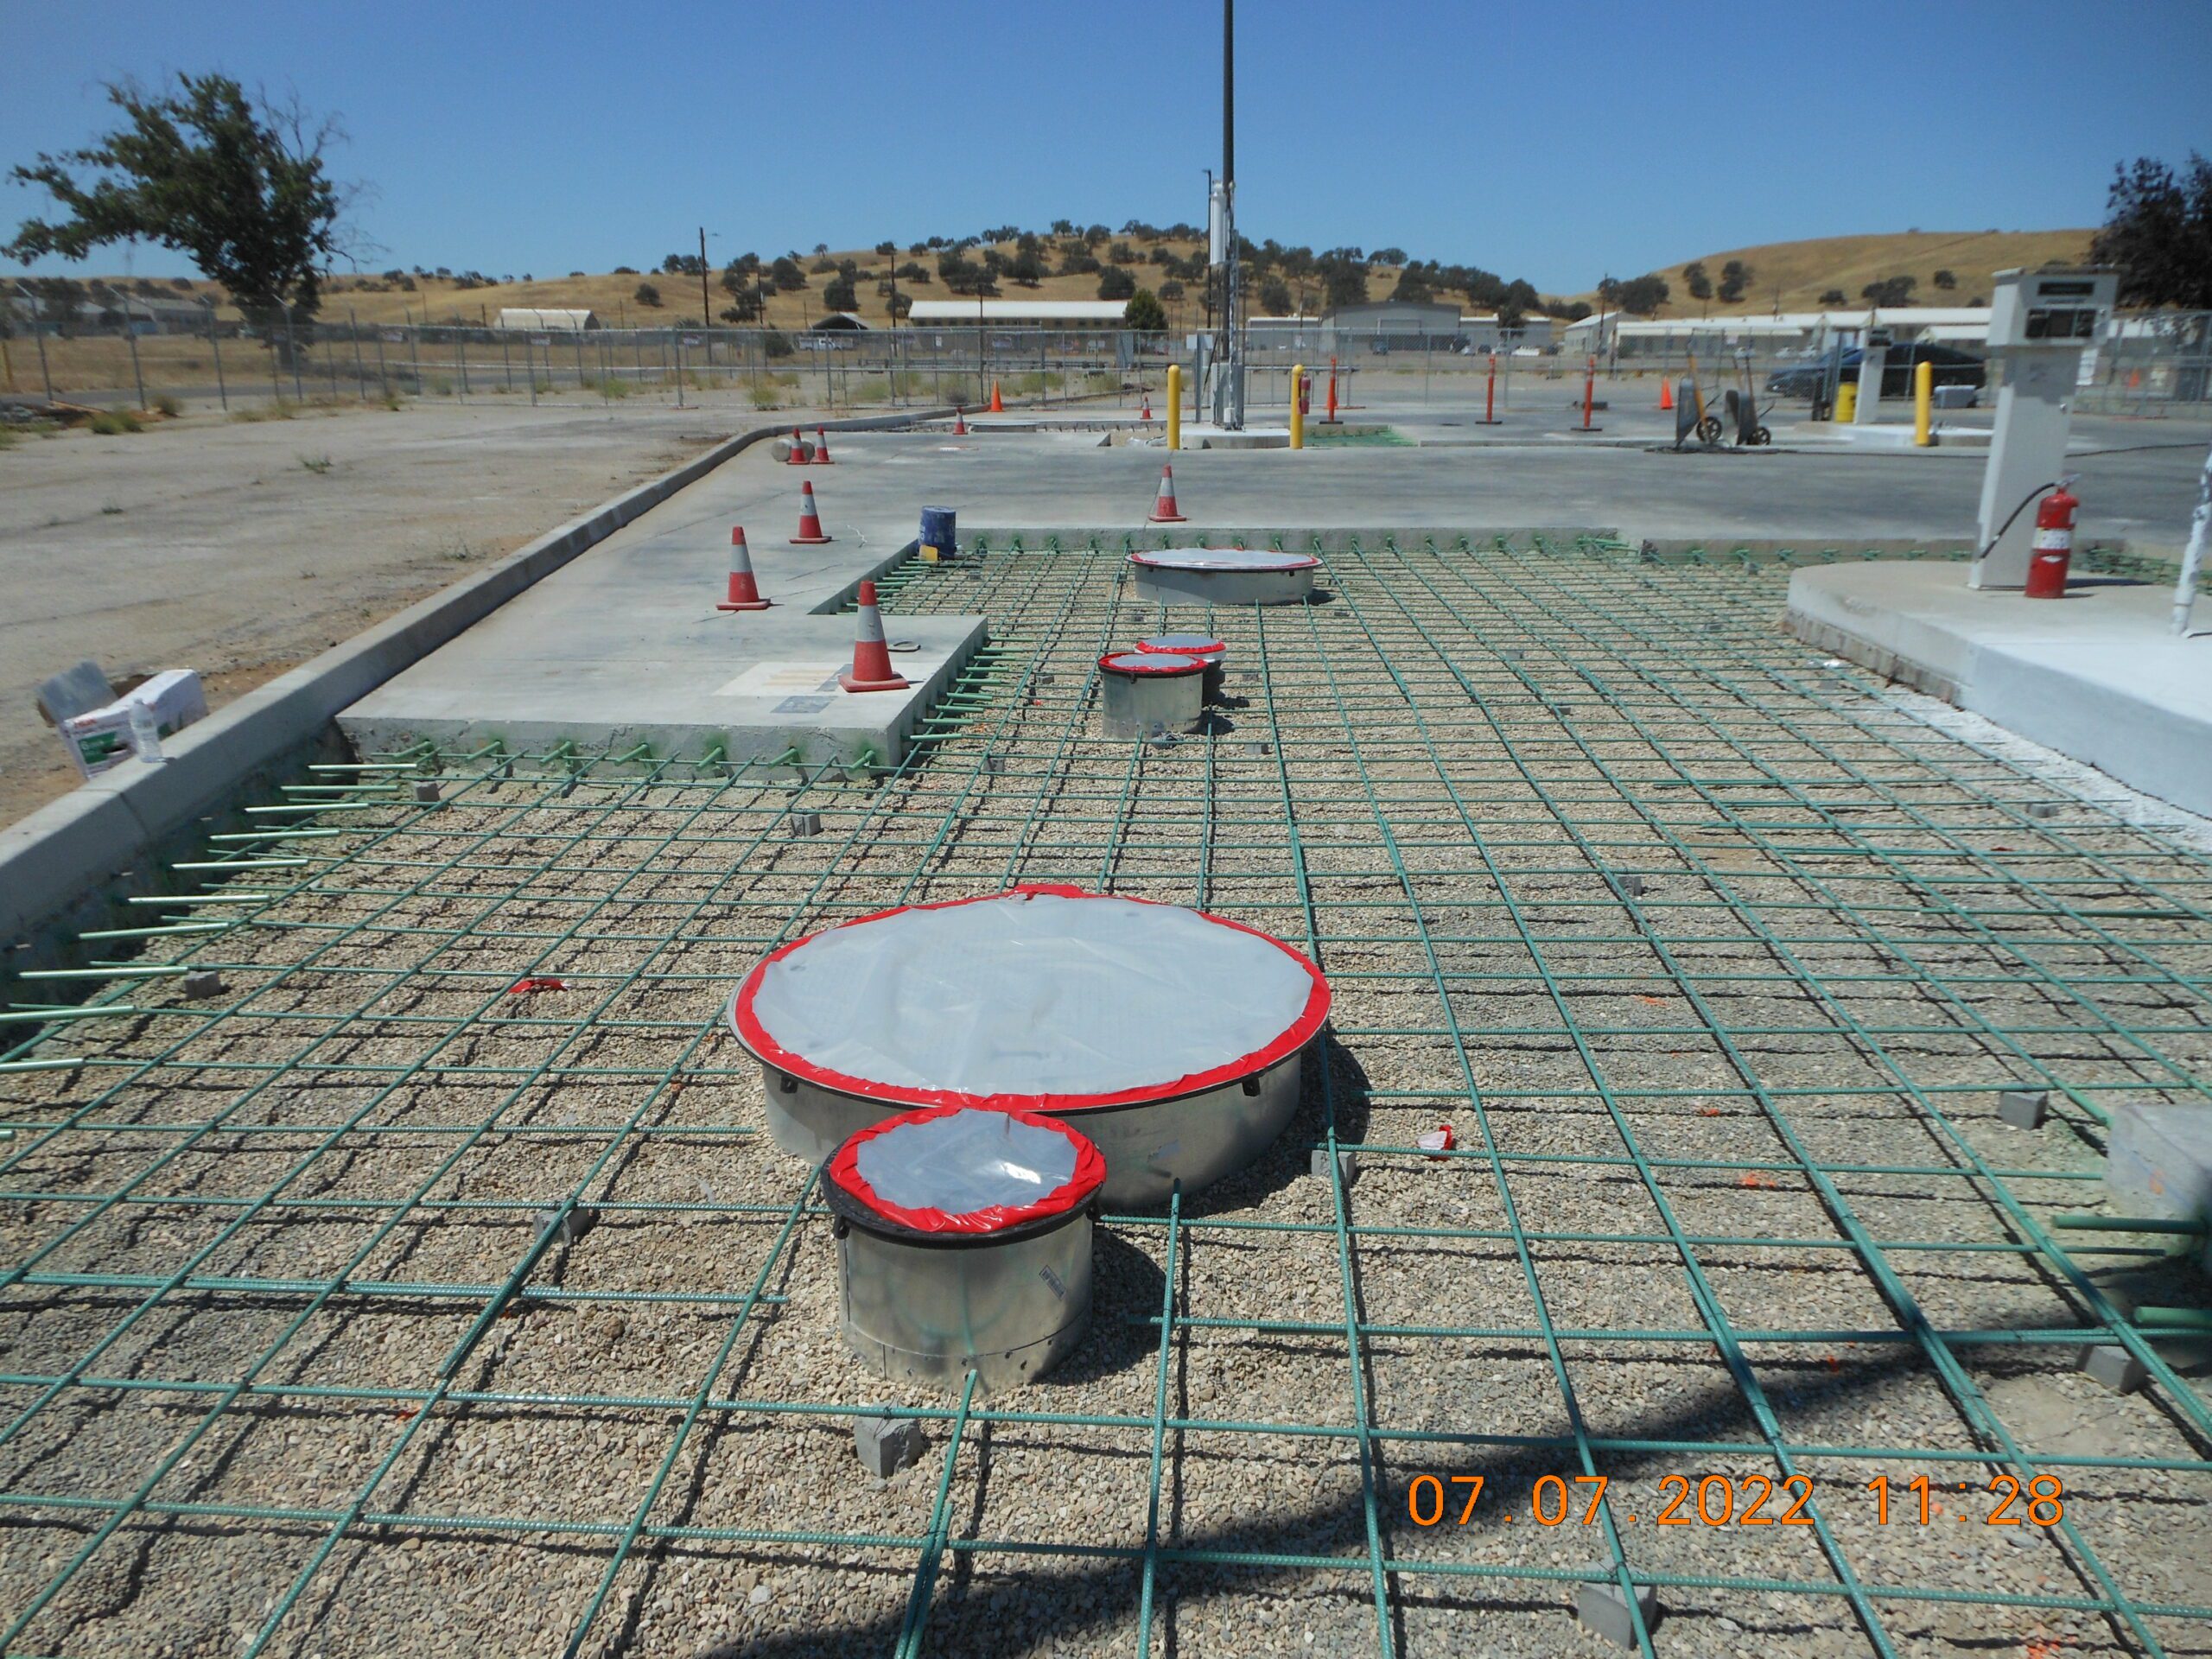 Construction site featuring an unfinished concrete base with exposed steel reinforcements and circular structures, set against a hilly background under a clear sky.